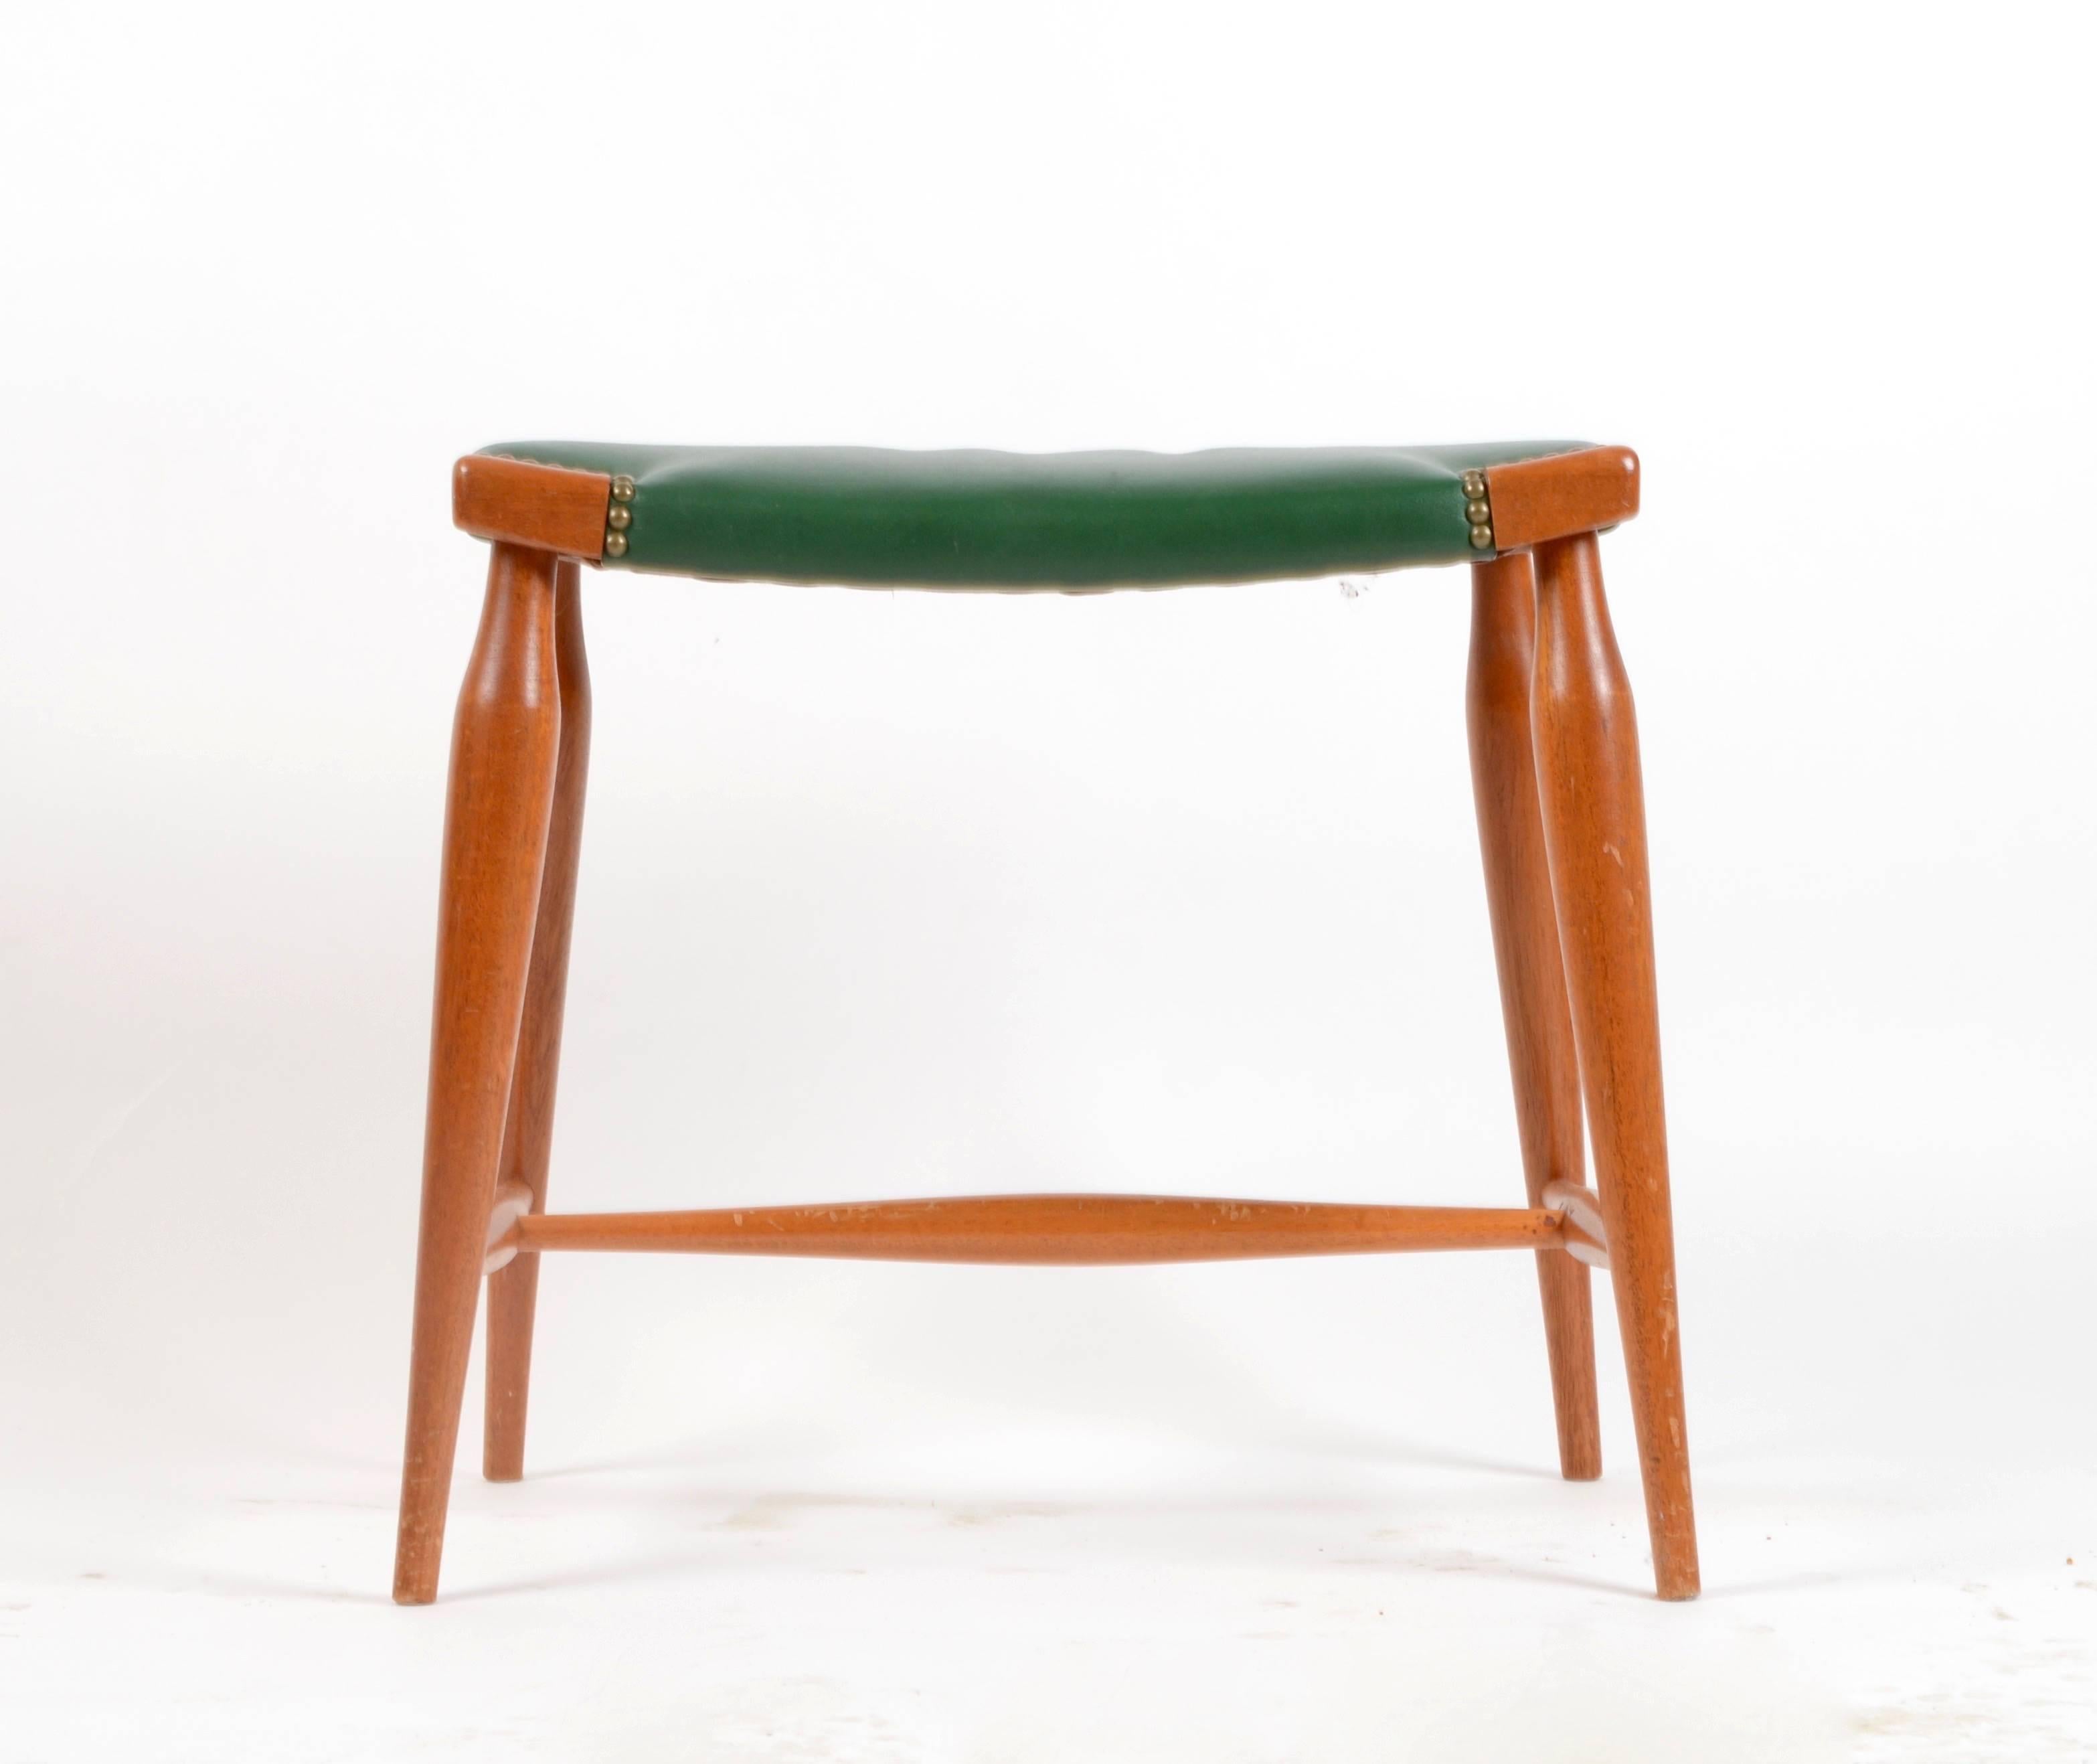 Stool in mahogany and leather designed by Josef Frank for Firma Svenskt Tenn, Sweden, mid-1900s.